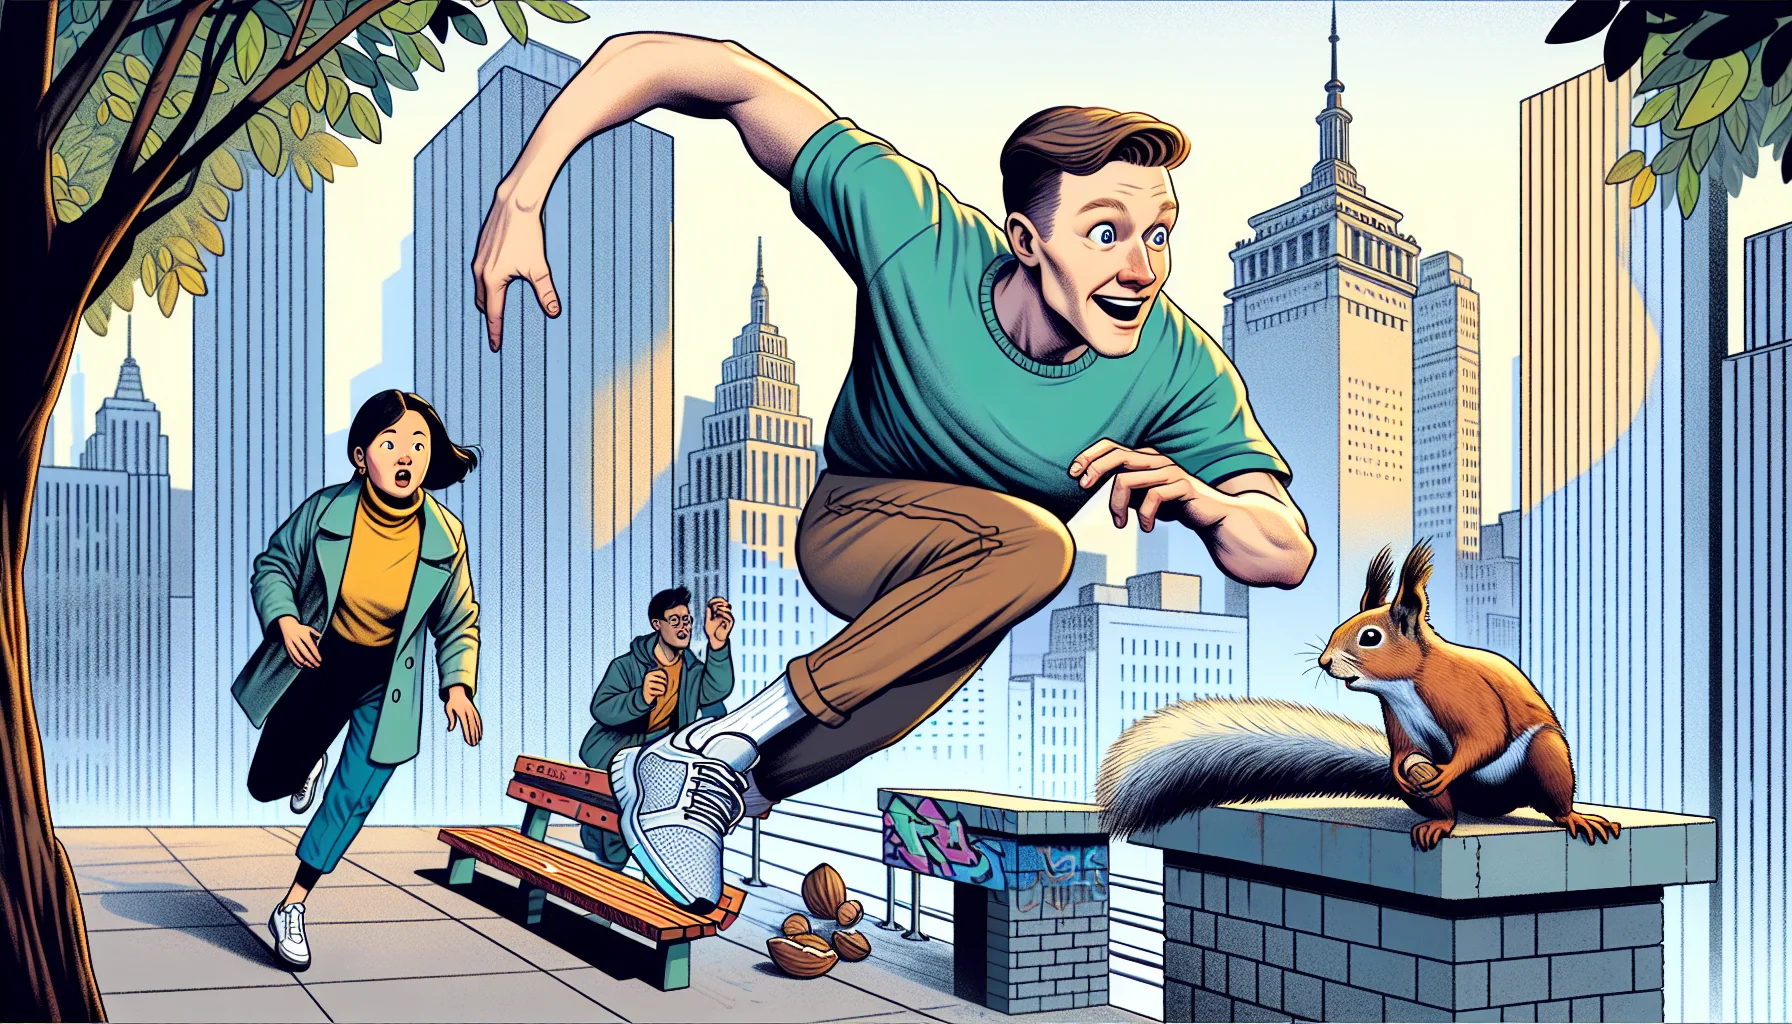 Create a realistic animated image featuring a humorous scenario to promote exercise through parkour. A man of Caucasian descent is seen leaping over an urban landscape, with aid of city structures like park benches and walls, almost tripping over a squirrel but managing to keep his balance. A woman of Asian descent is scaling a wall close by turning a surprised face to the man. The squirrel runs off, leaving behind a nut which becomes a comic focal point. Draw the animation in a lively and vividly colorful style to make exercise seem exciting and fun.